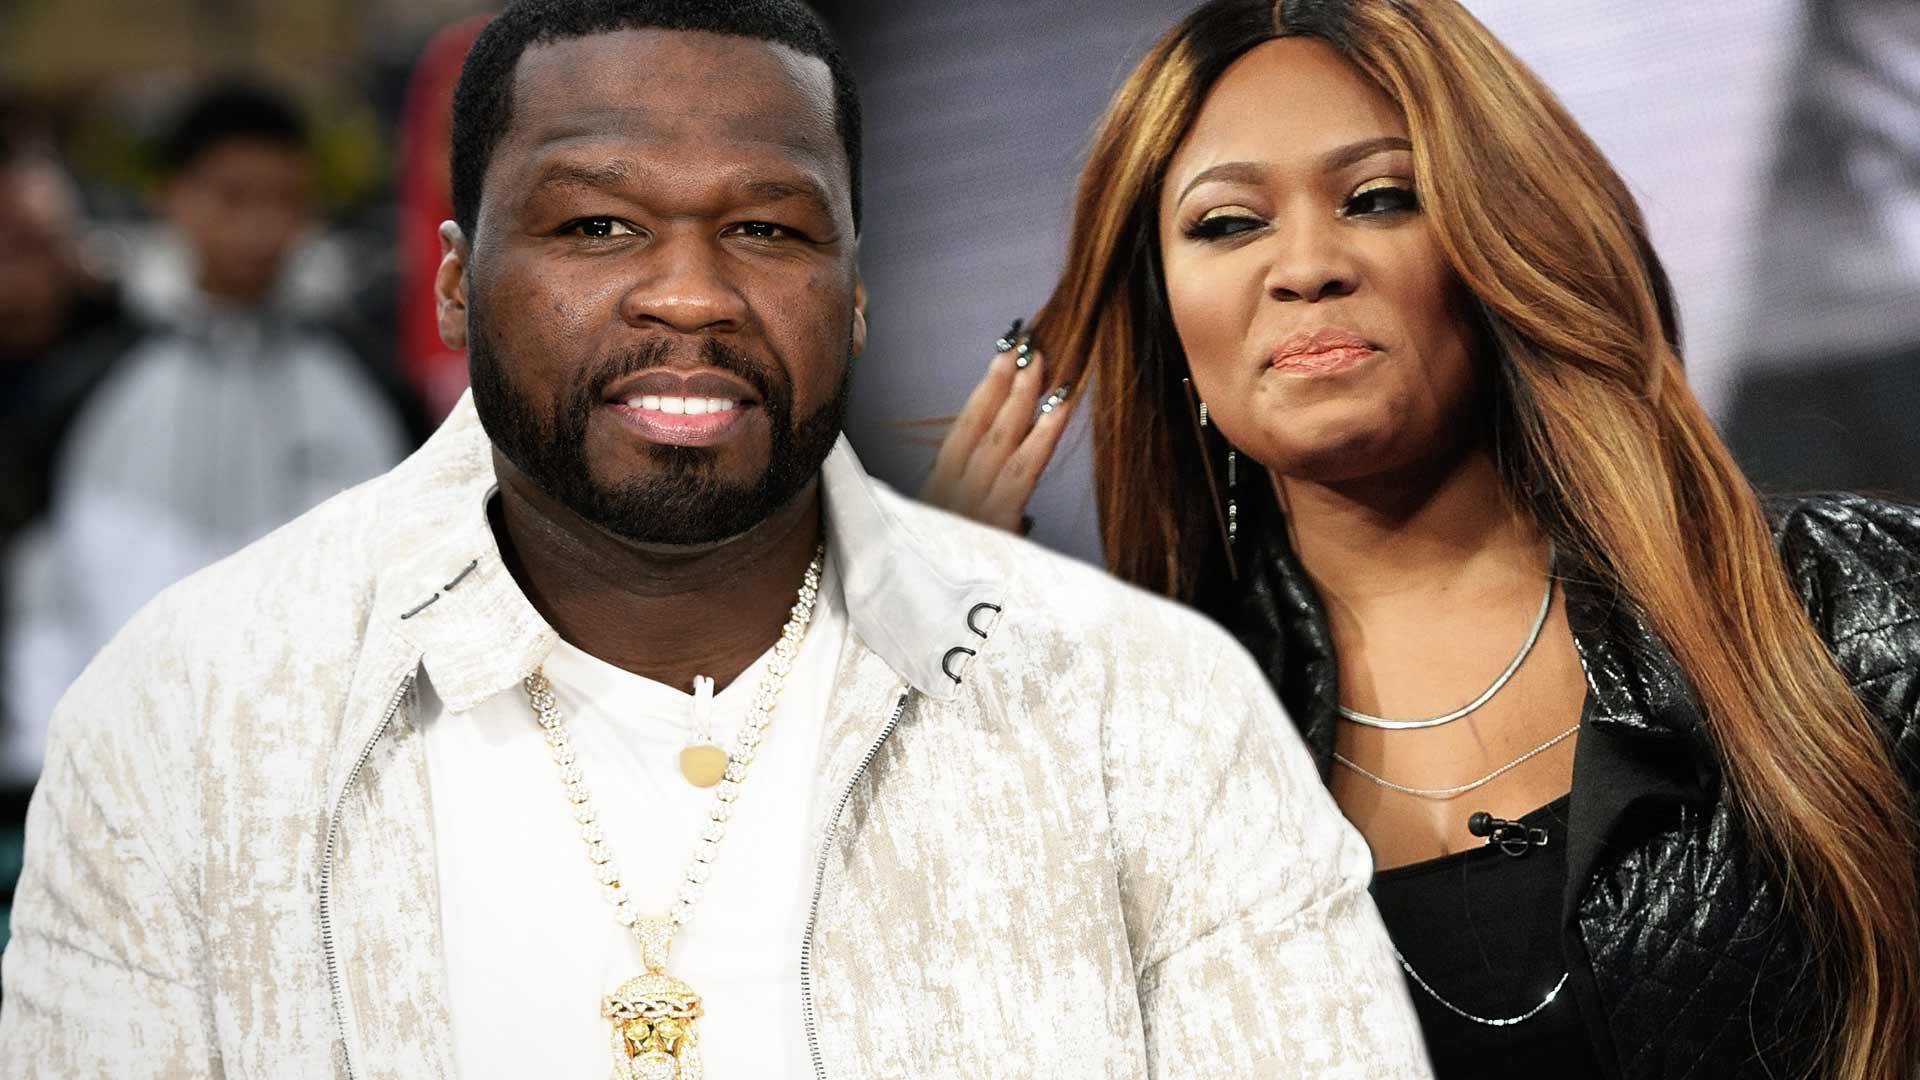 ‘Love & Hip Hop’ Star Teairra Mari Taunts 50 Cent After ‘Clerical Error’ Leads to Arrest Warrant Confusion